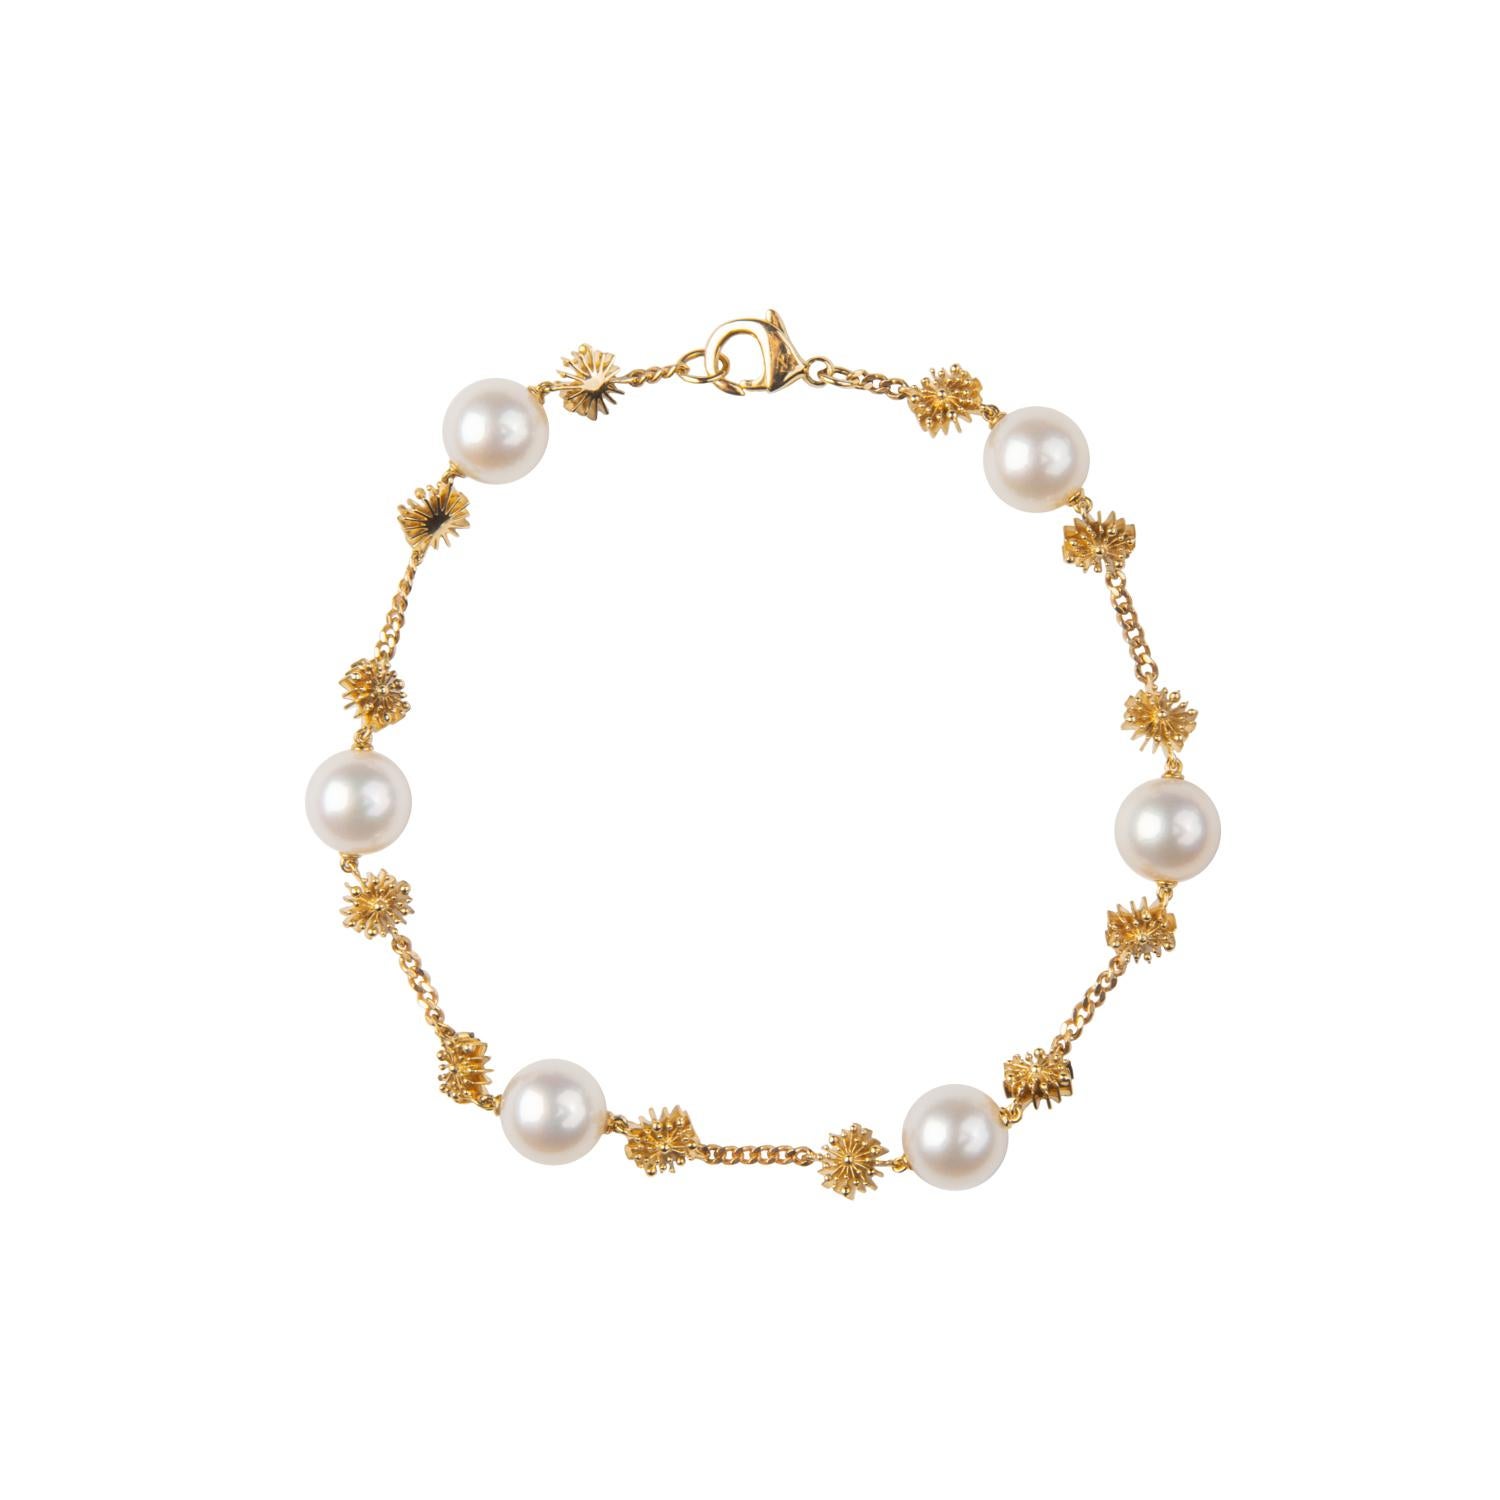 The ‘Soleil’ Pearl Bracelet by Natalie Barney feature 7mm Freshwater Pearls with fine sun shapes. It is the perfect discreet piece for everyday wear and comes with the matching necklace and drop earrings.

Made in 9 karat yellow gold. 

Radiate